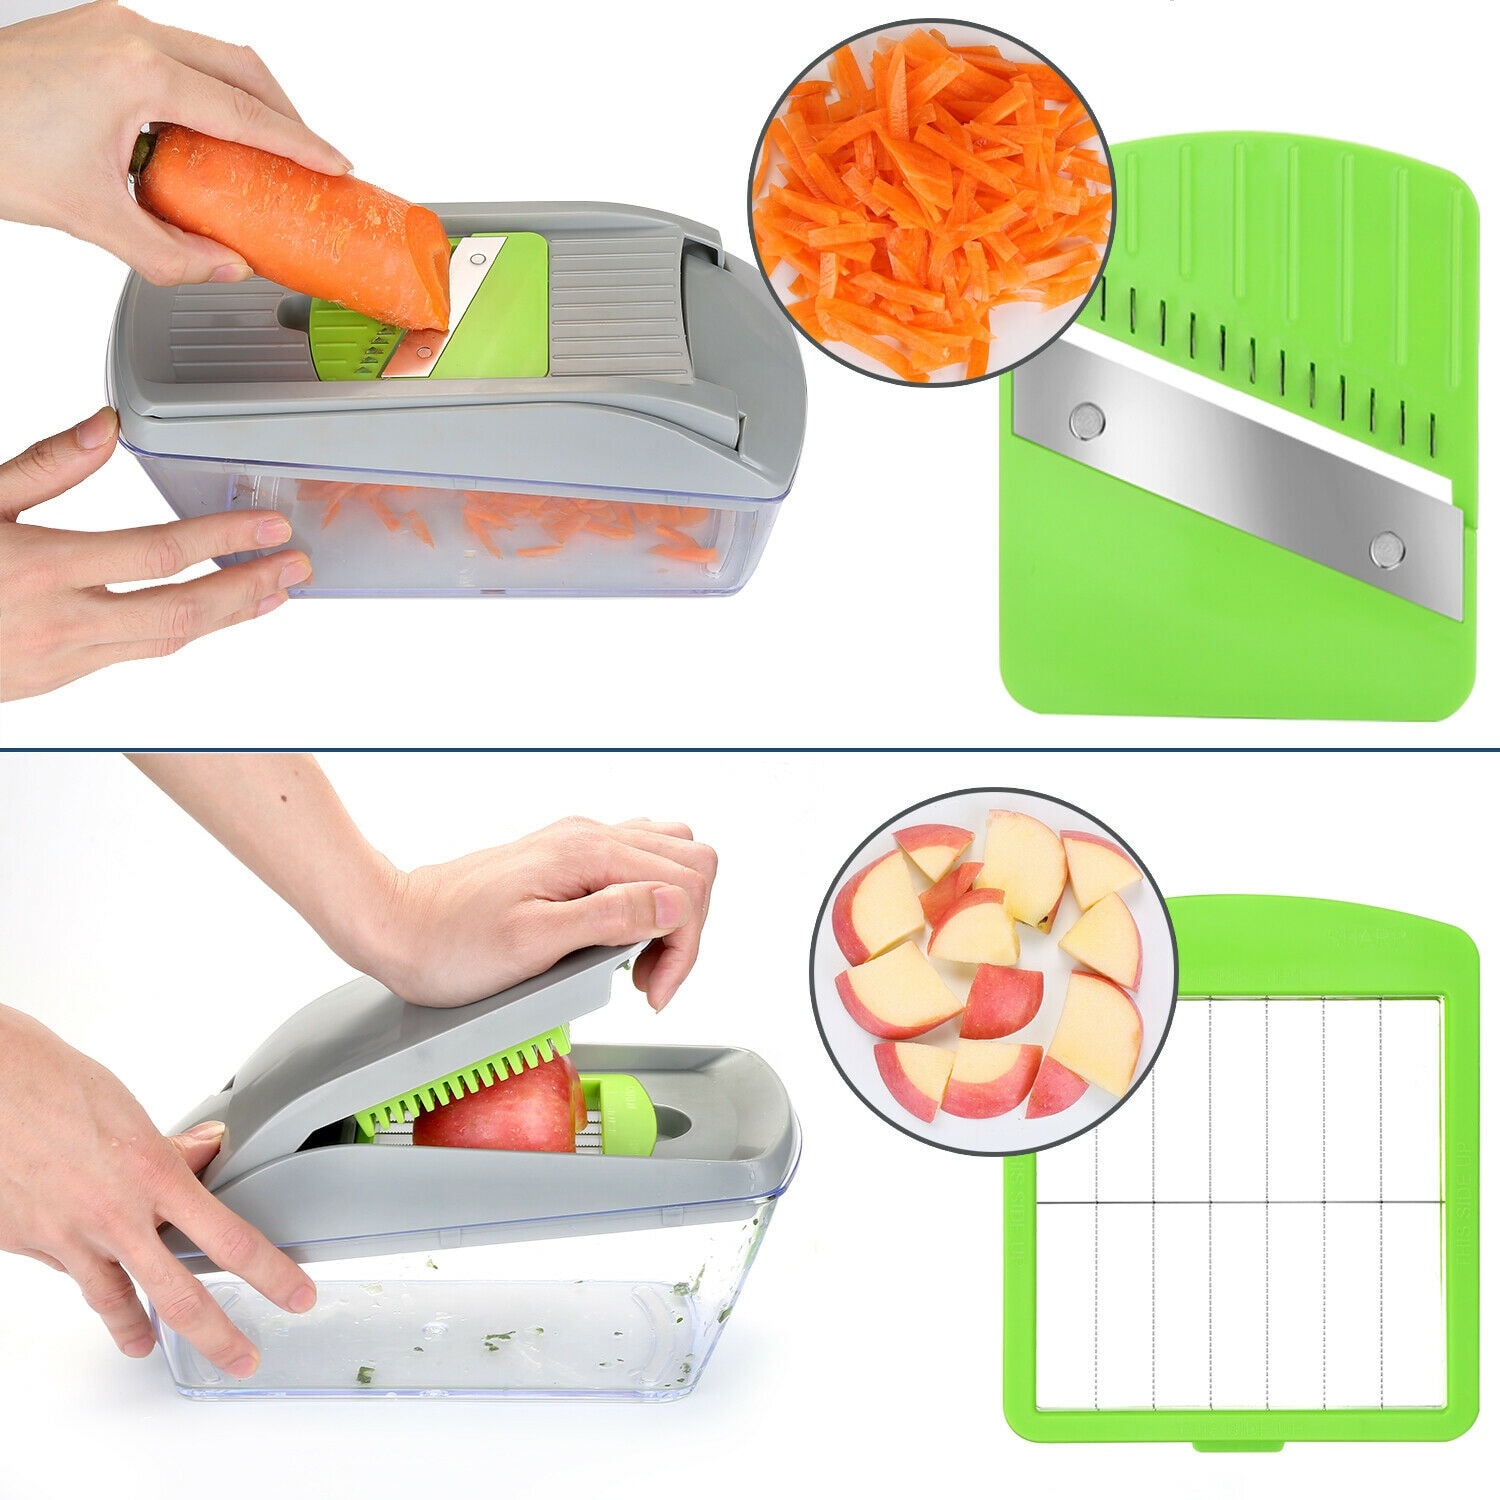 FITNATE Vegetable Chopper 14 in 1 Onion Chopper Multifunctional Food Chopper  for Kitchen, 1 unit - Food 4 Less